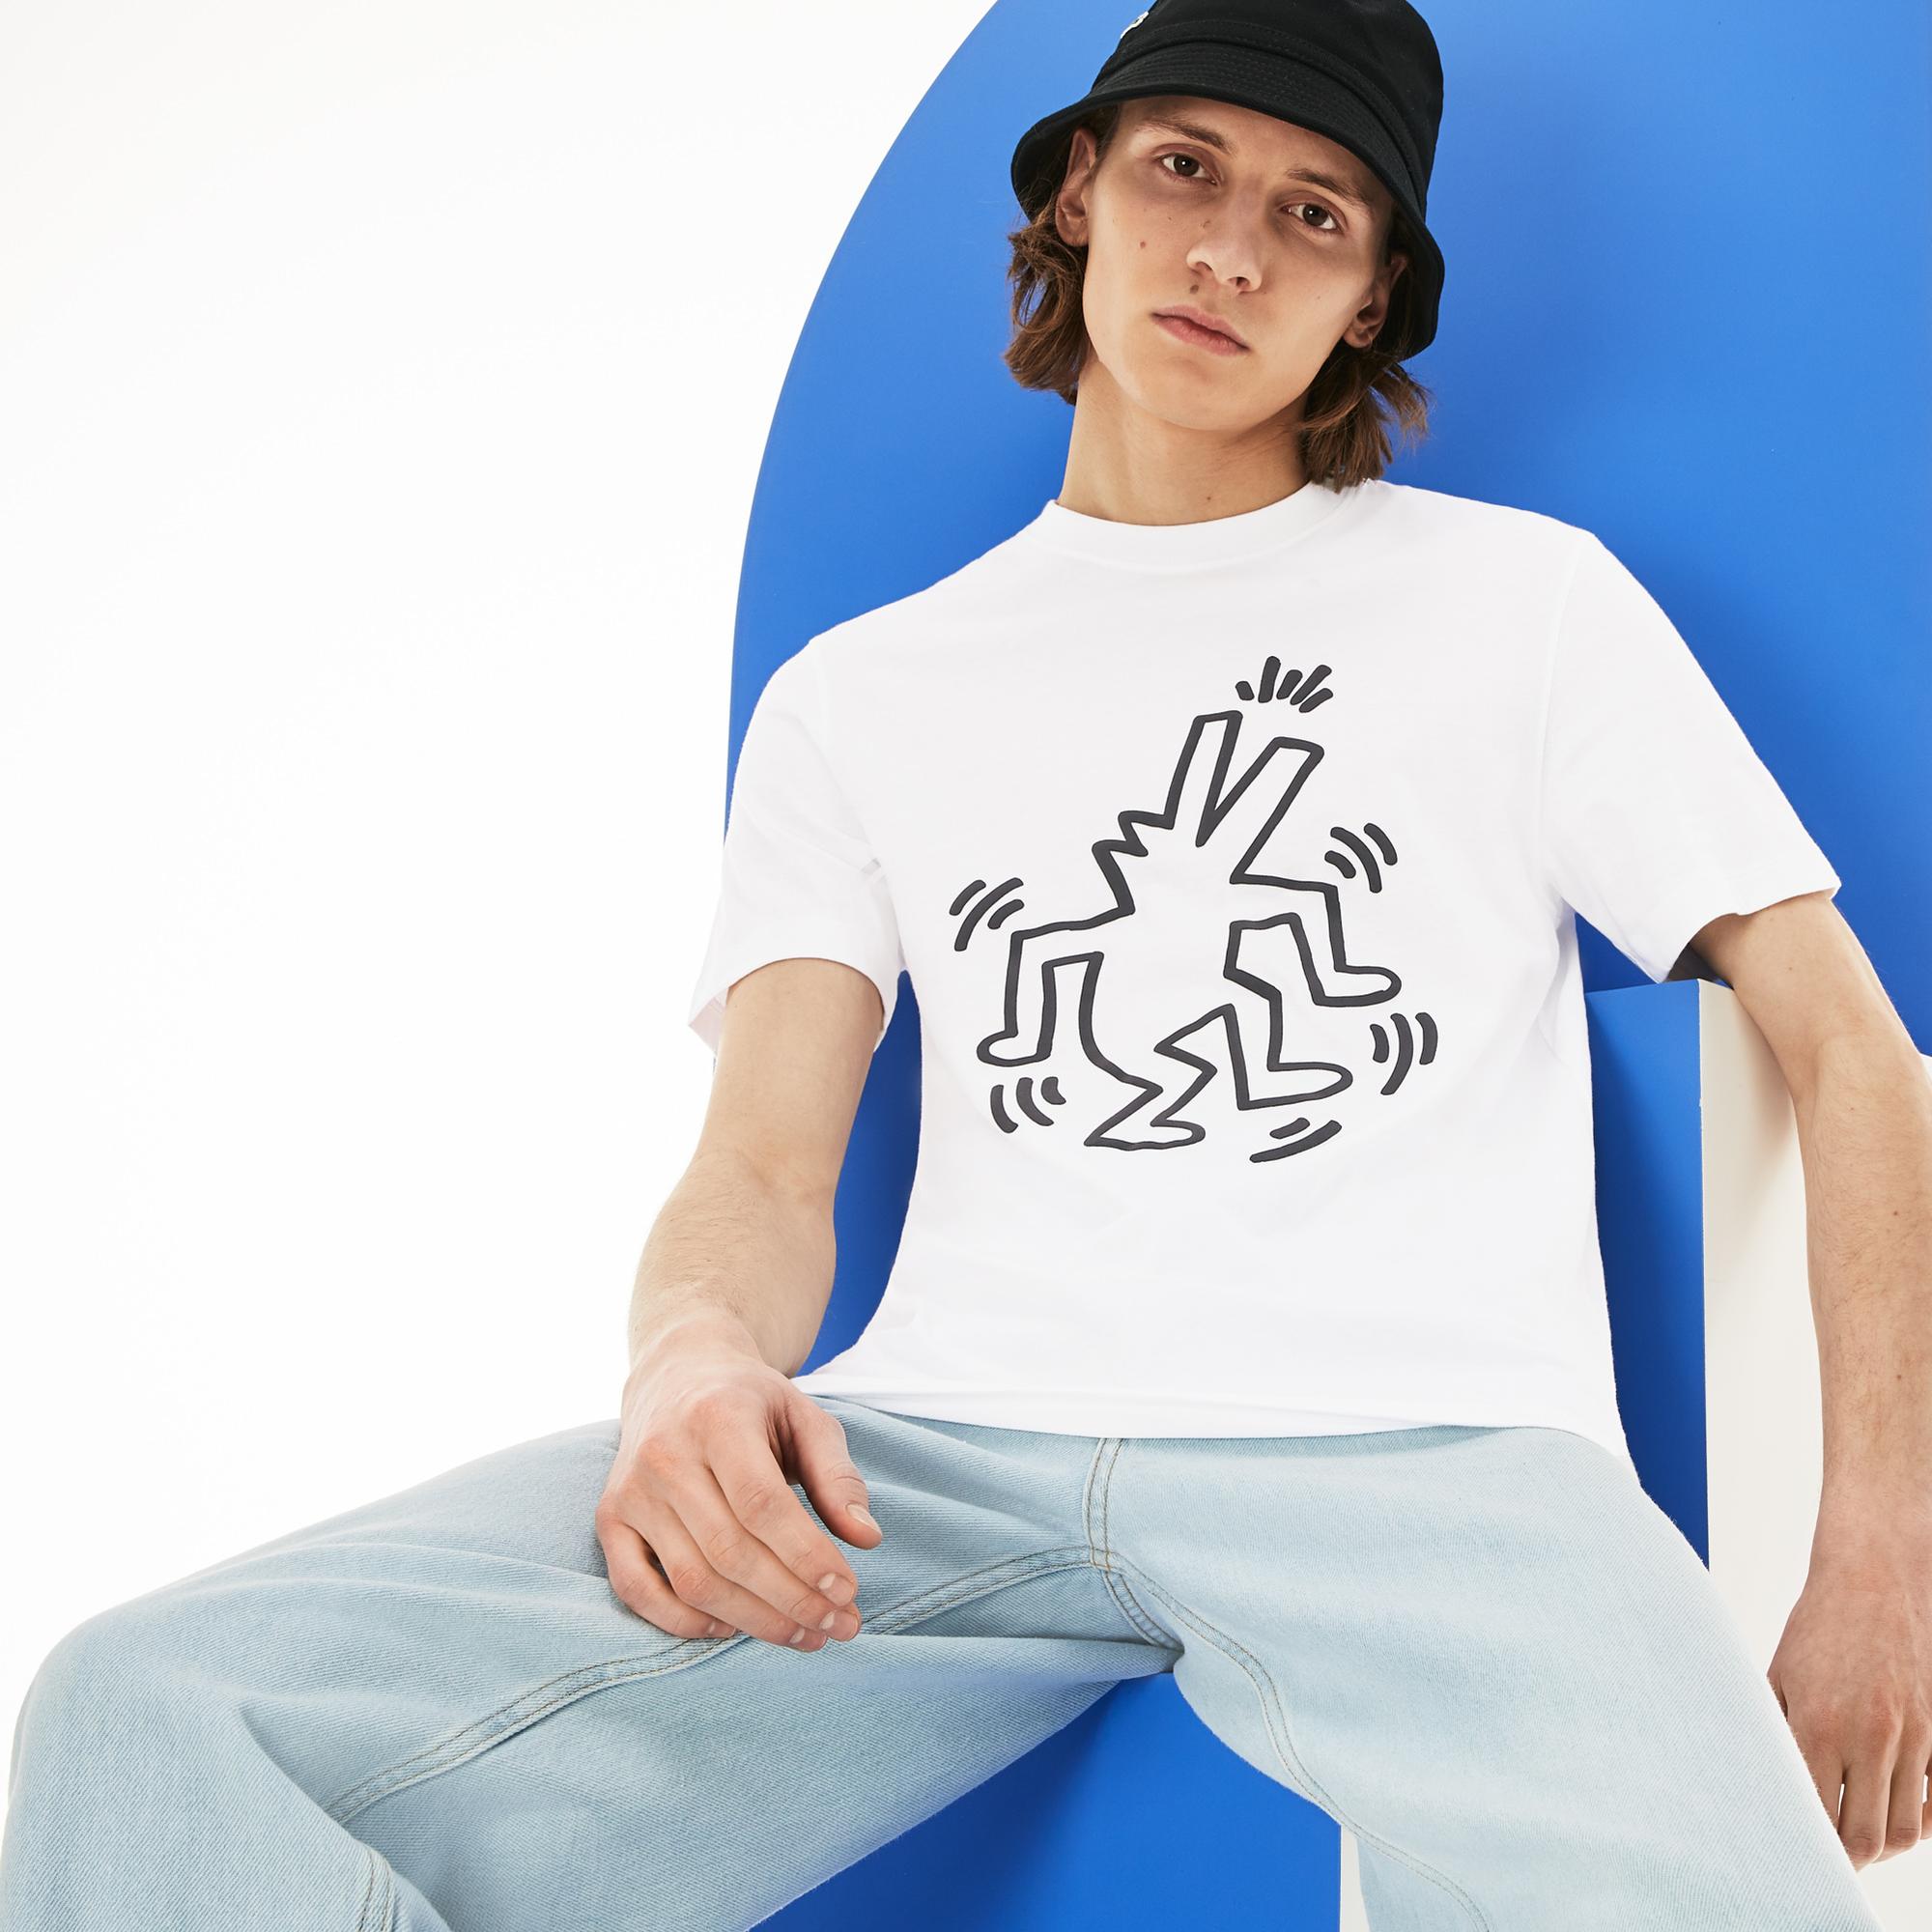 lacoste keith haring shirt